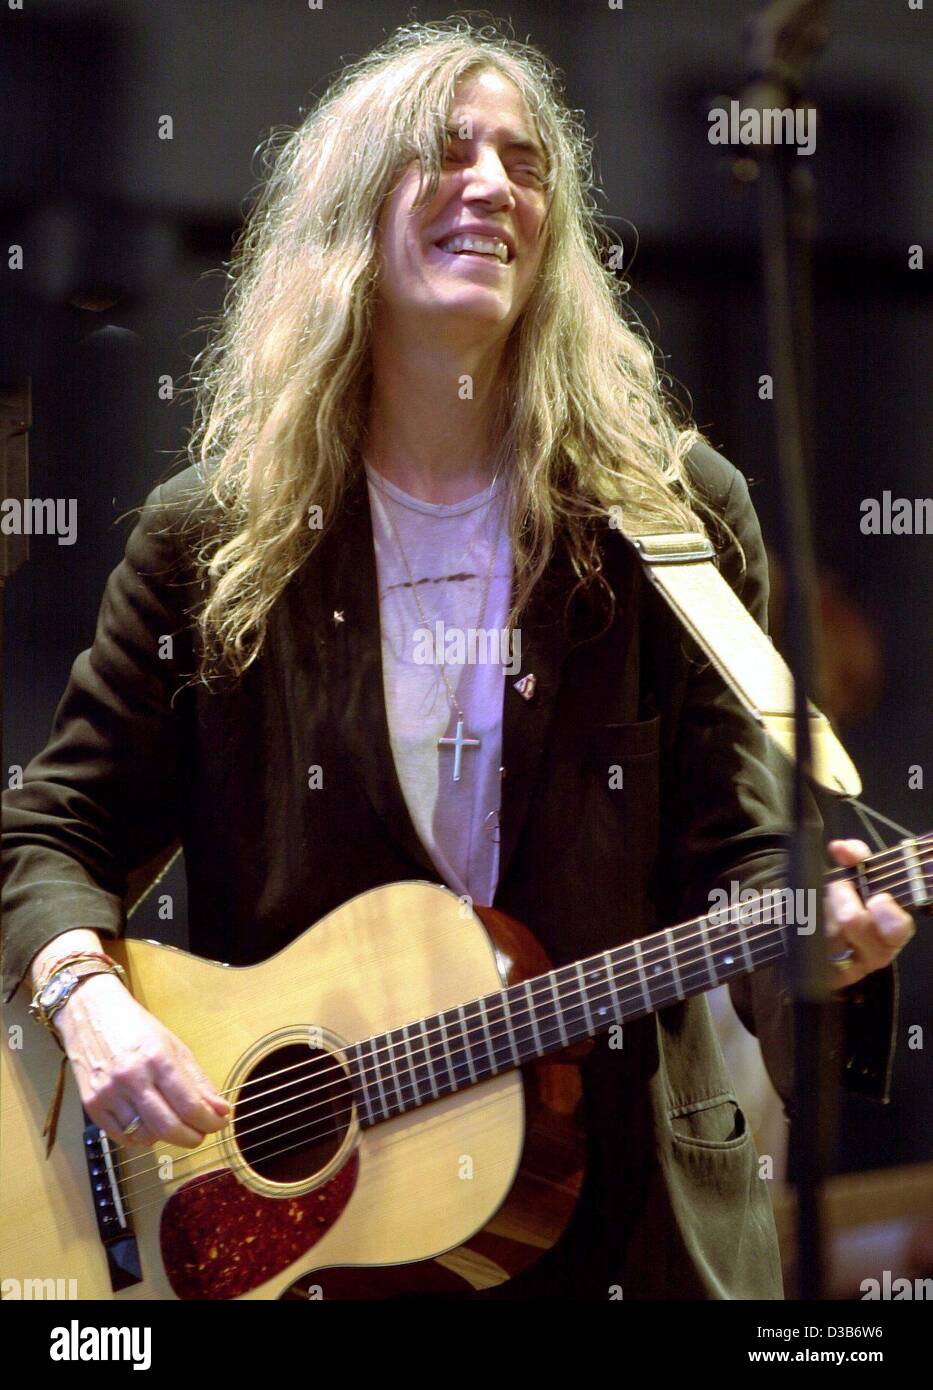 (dpa) - US rock singer Patti Smith performs during an open air concert in Berlin, 9 August 2002. The 55 year old, who is currently touring Germany, said in an interview that she would like to live in Europe after her daughter has grown up. Stock Photo